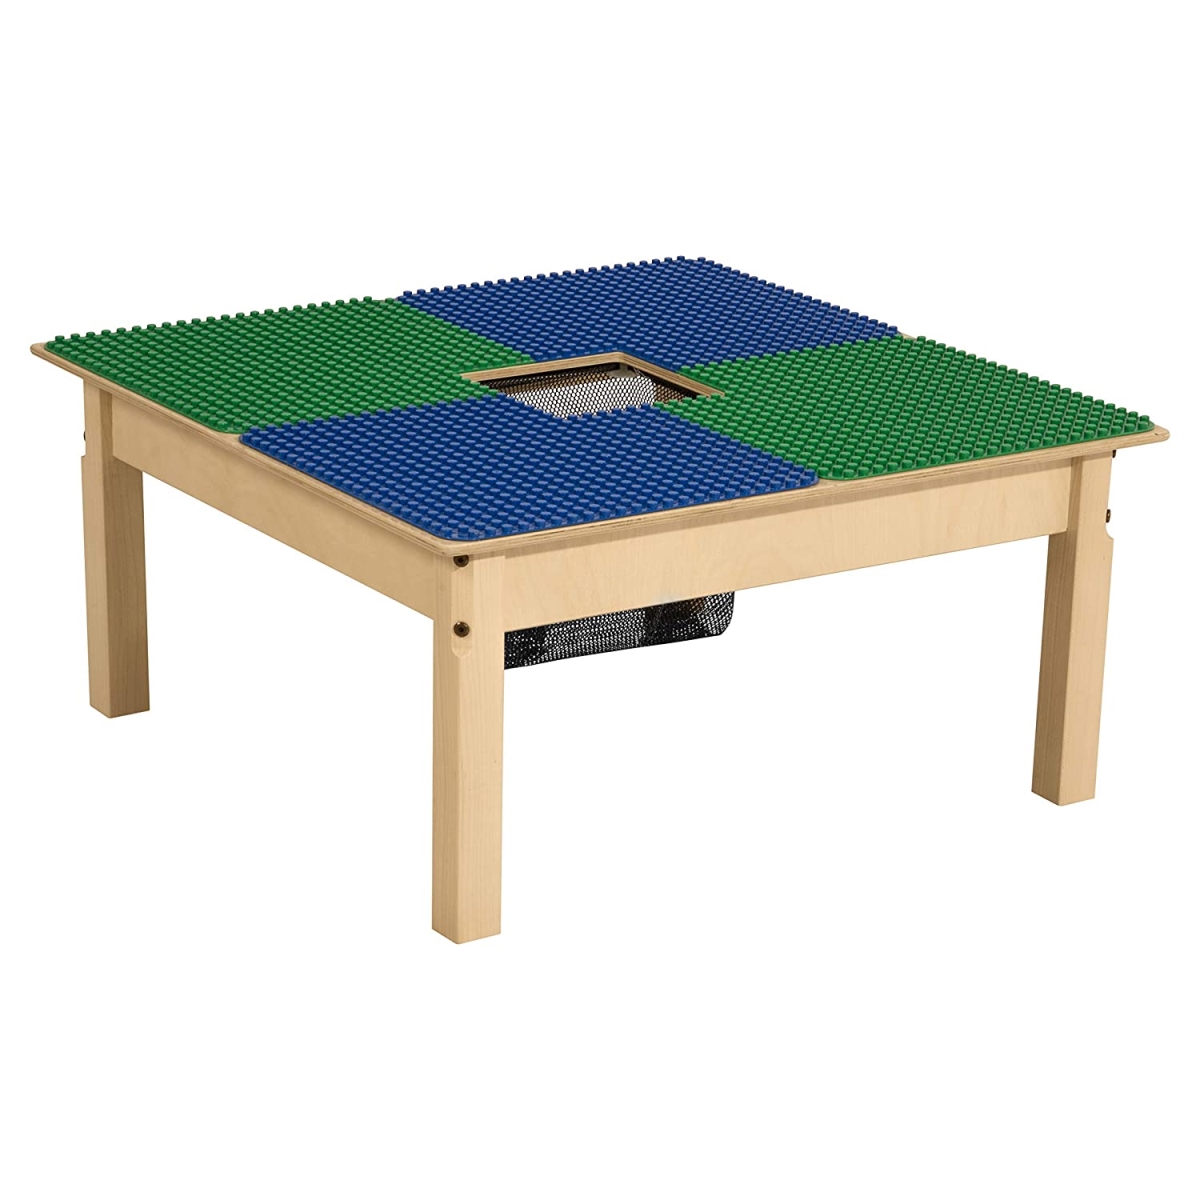 Tp3131pgn14-bg 14 In. Duplo Compatible Table With Legs, Blue & Green - Square